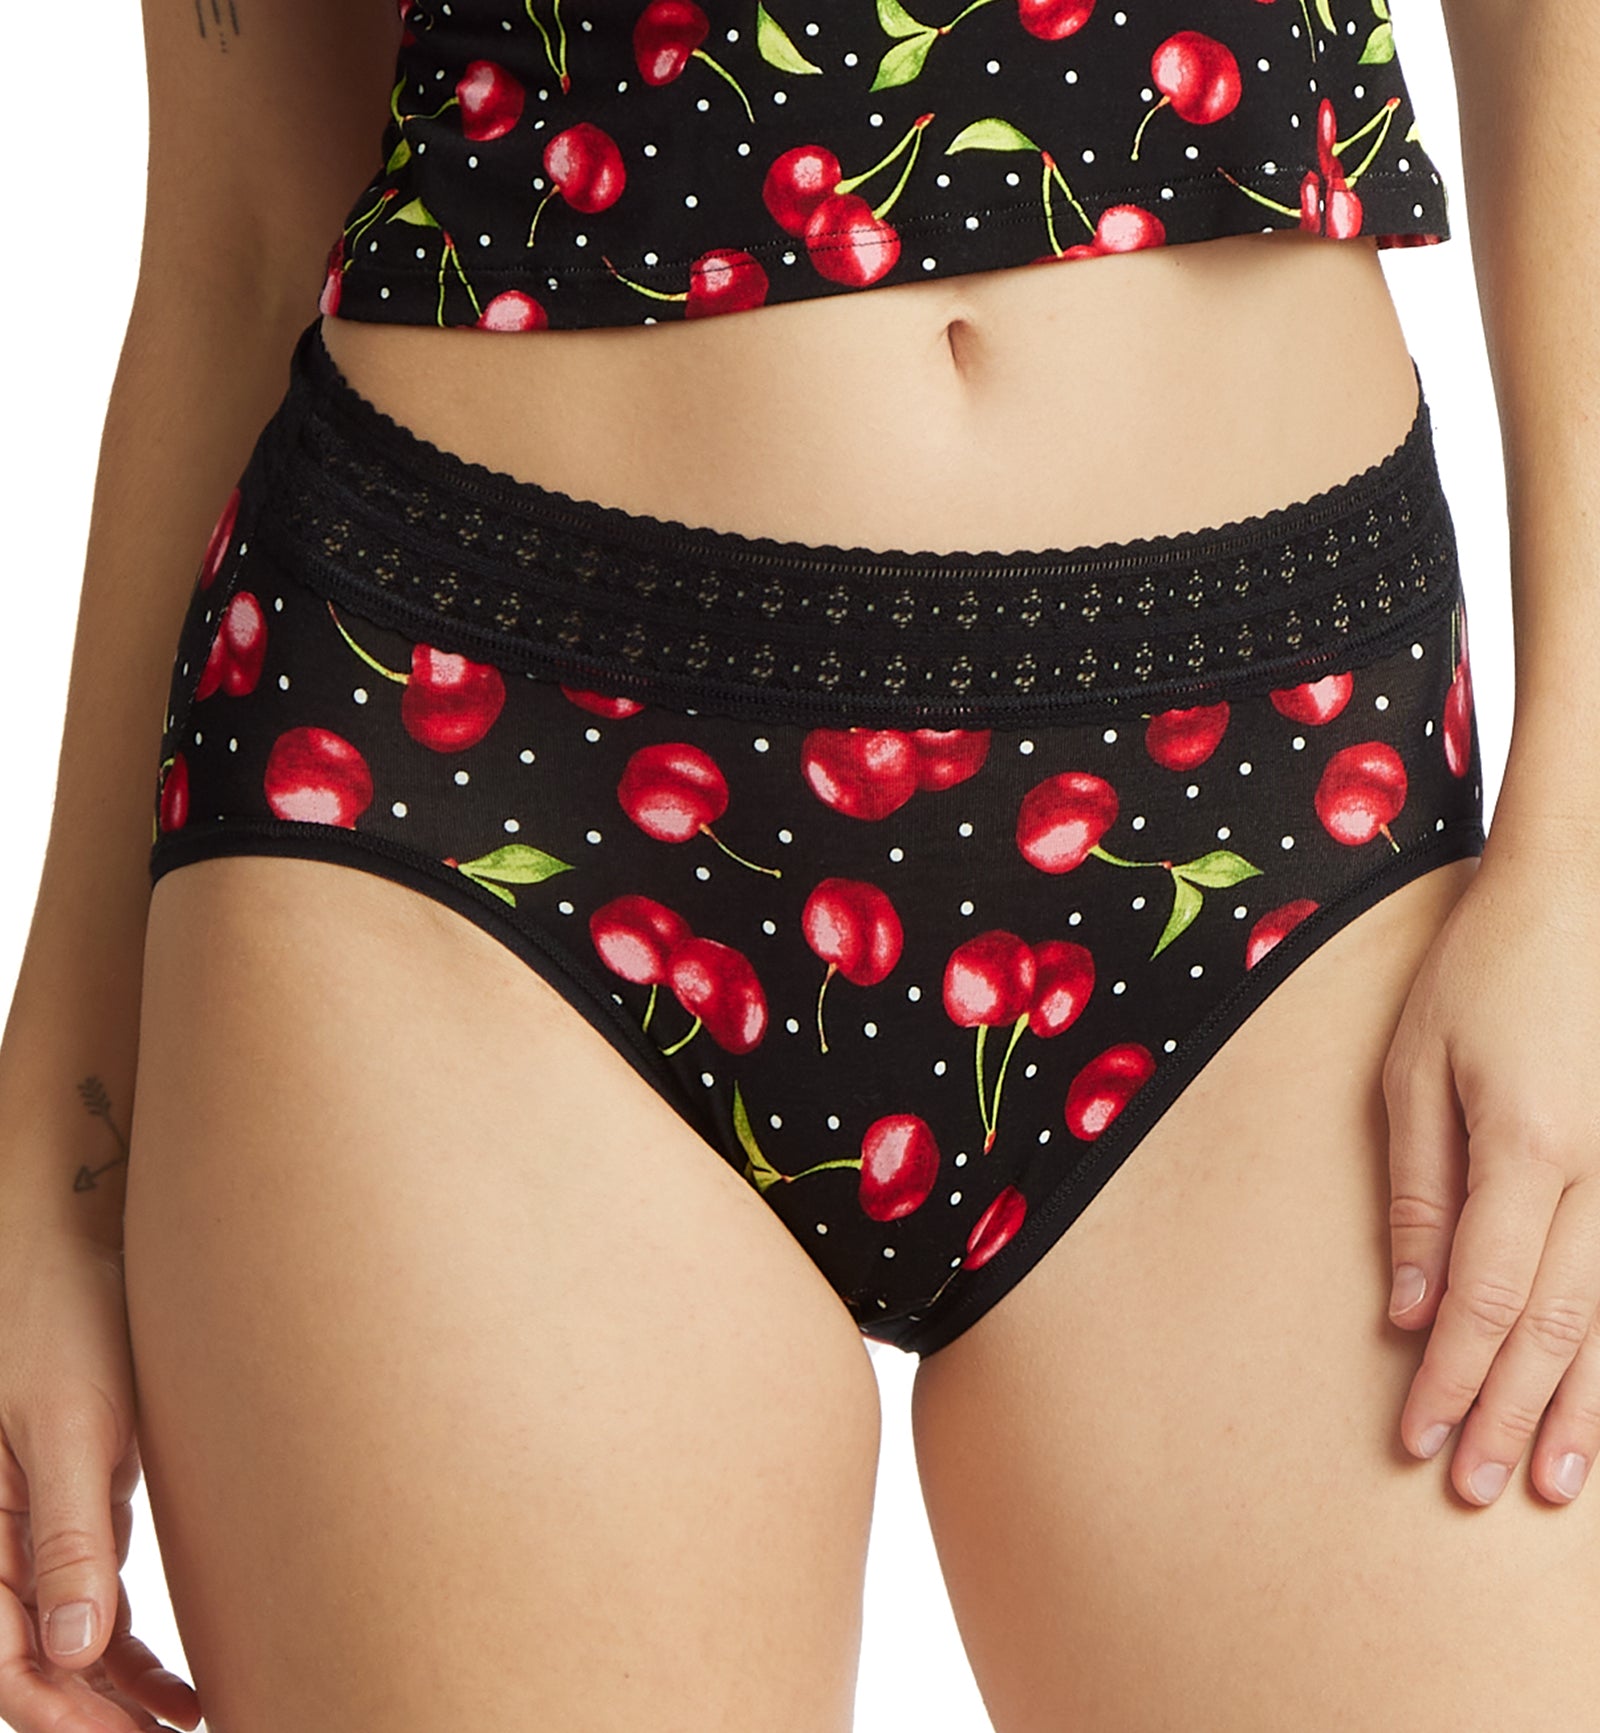 Hanky Panky DreamEase Printed French Brief (PR682464),Small,Cherry Bomb - Cherry Bomb,Small